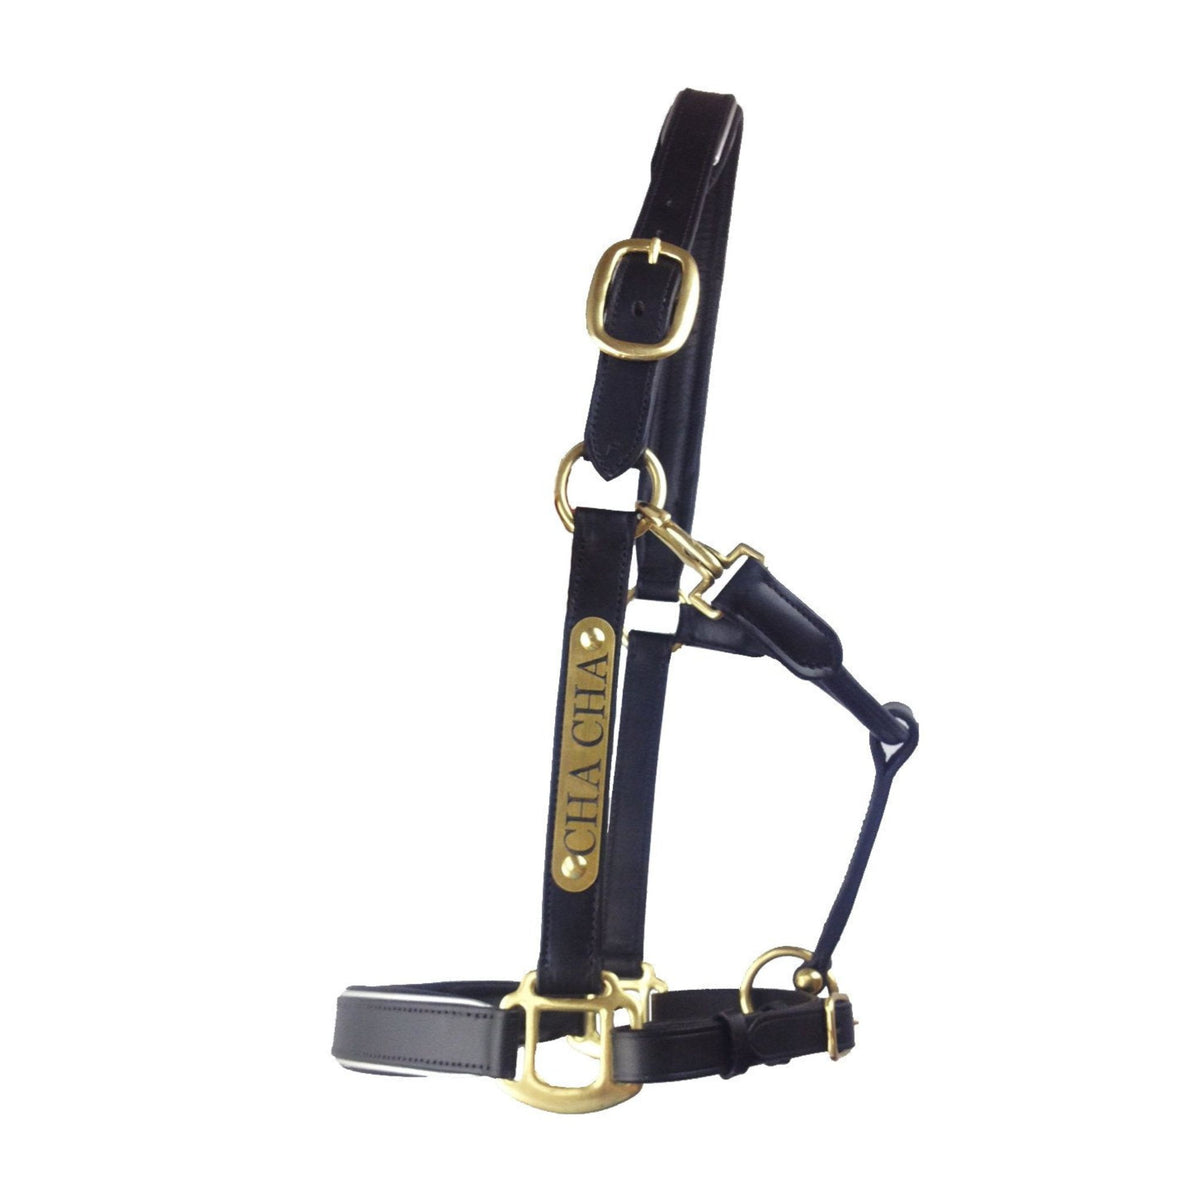 Black leather halter with brass fixings and nameplate on side.